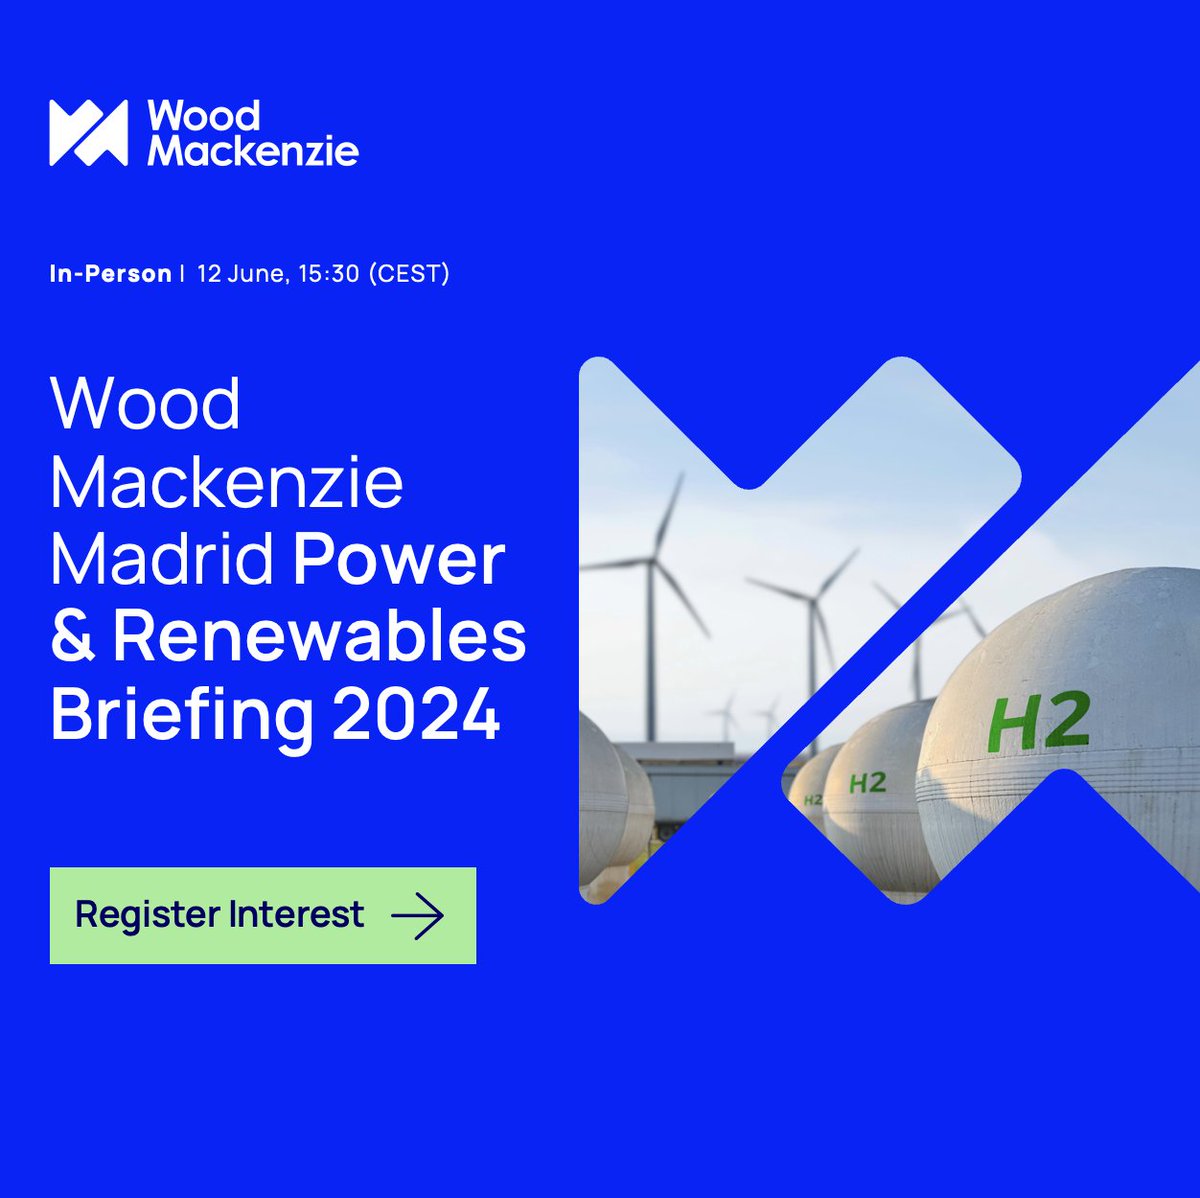 Join industry leading figures at Wood Mackenzie’s upcoming Madrid Power & Renewables Briefing and drinks reception taking place on Wednesday 12 June. Register your interest and find out more here: okt.to/iavyw6 #energystorage #hydrogen